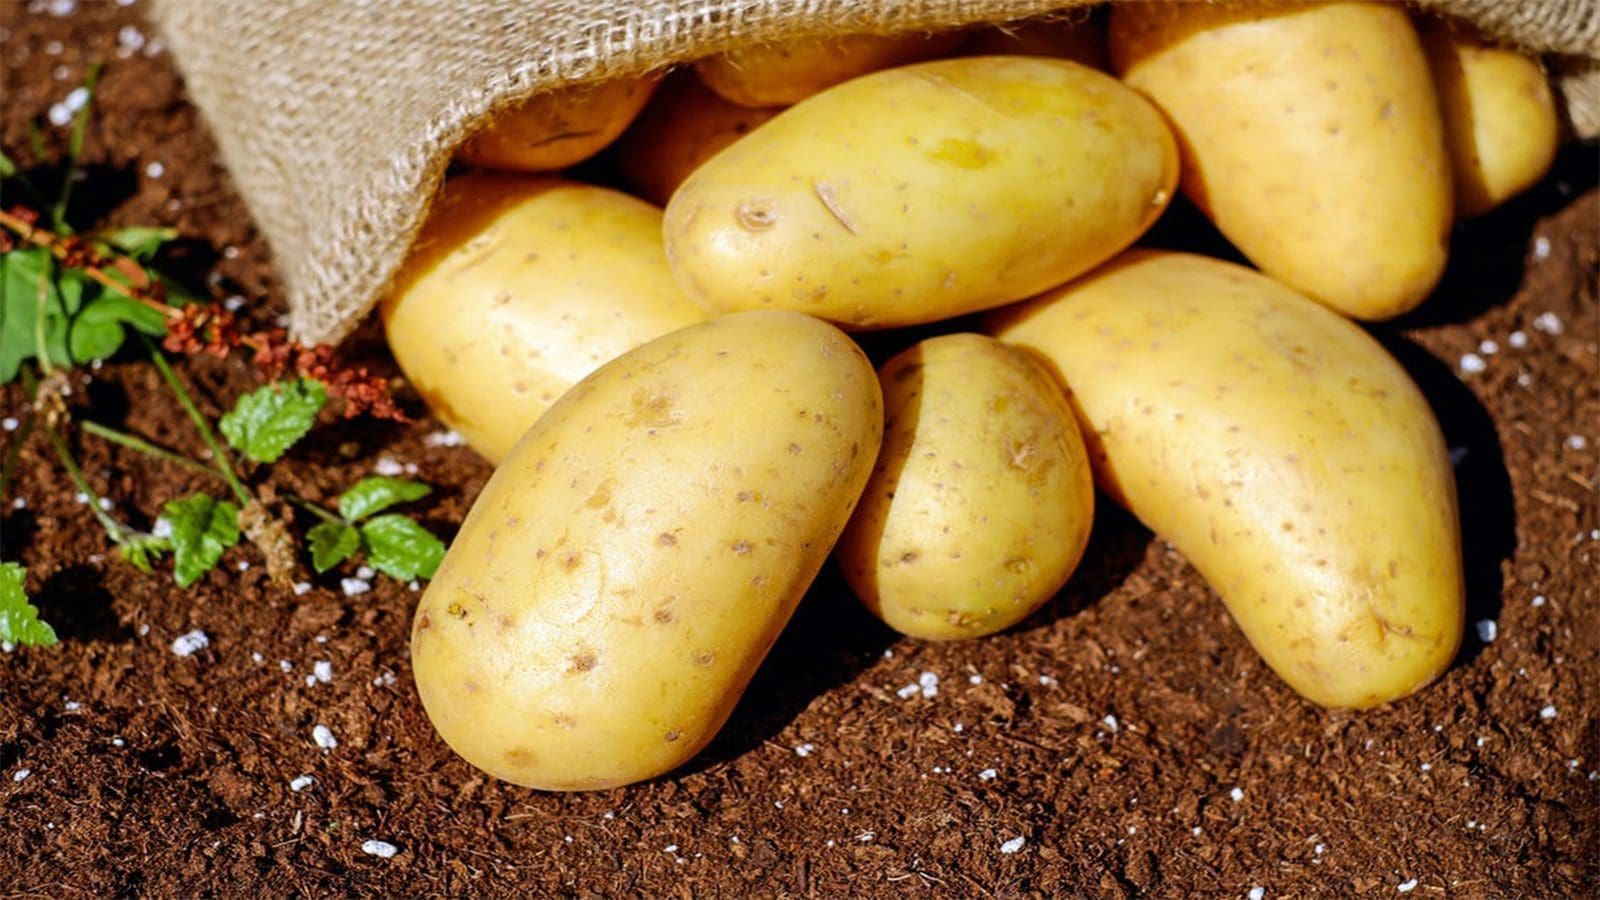 Solynta, RegenZ tie up to provide hybrid true potatoes to South African farmers